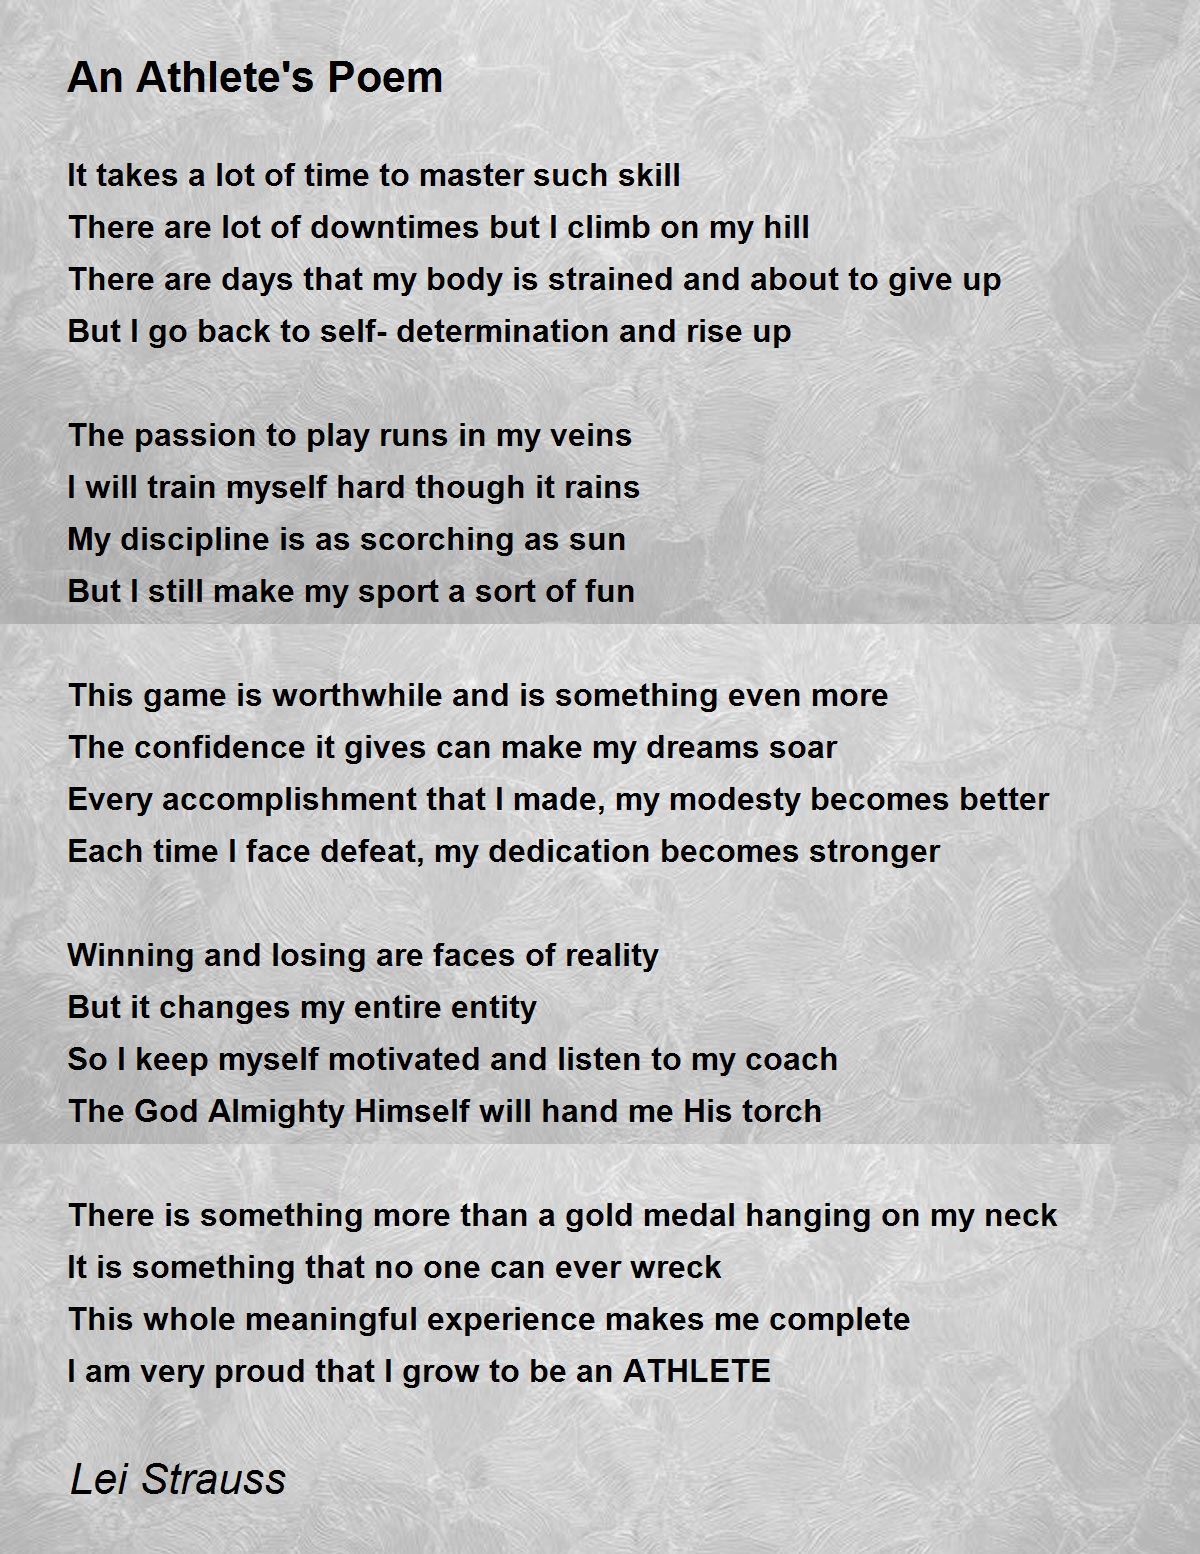 An Athlete S Poem By Lei Strauss